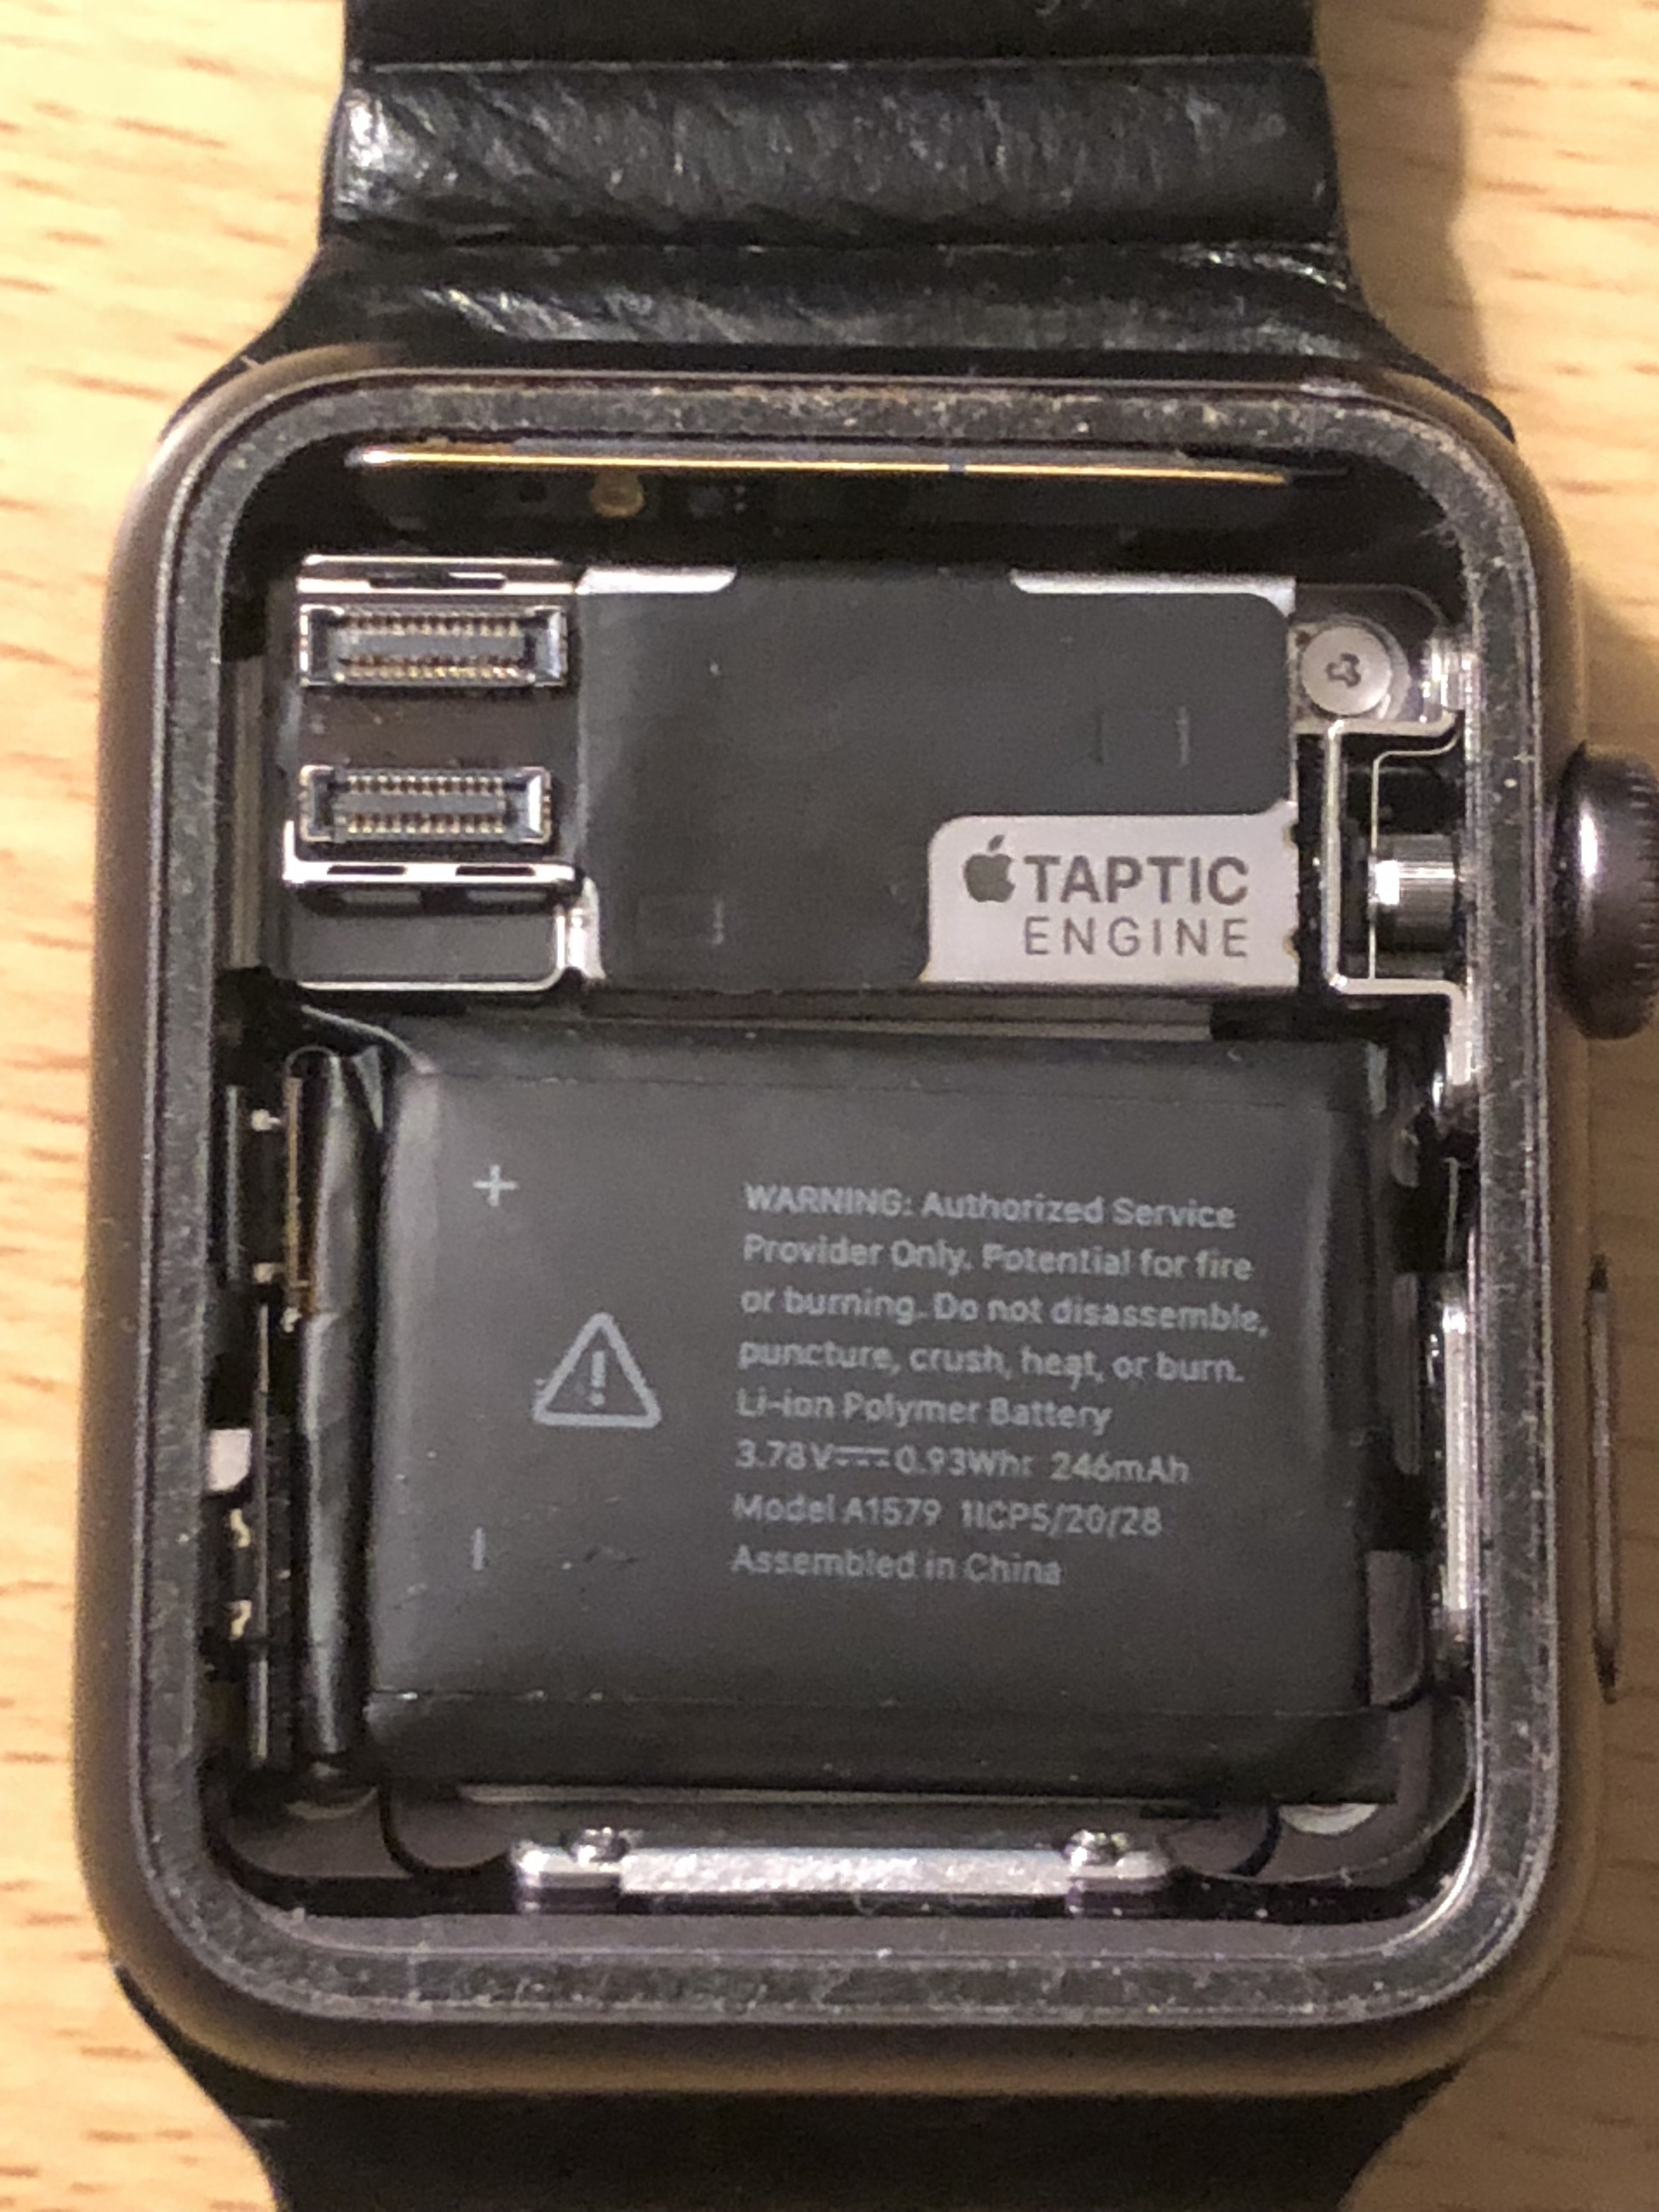 Apple Watch Display off, is this a swollen battery? | MacRumors Forums